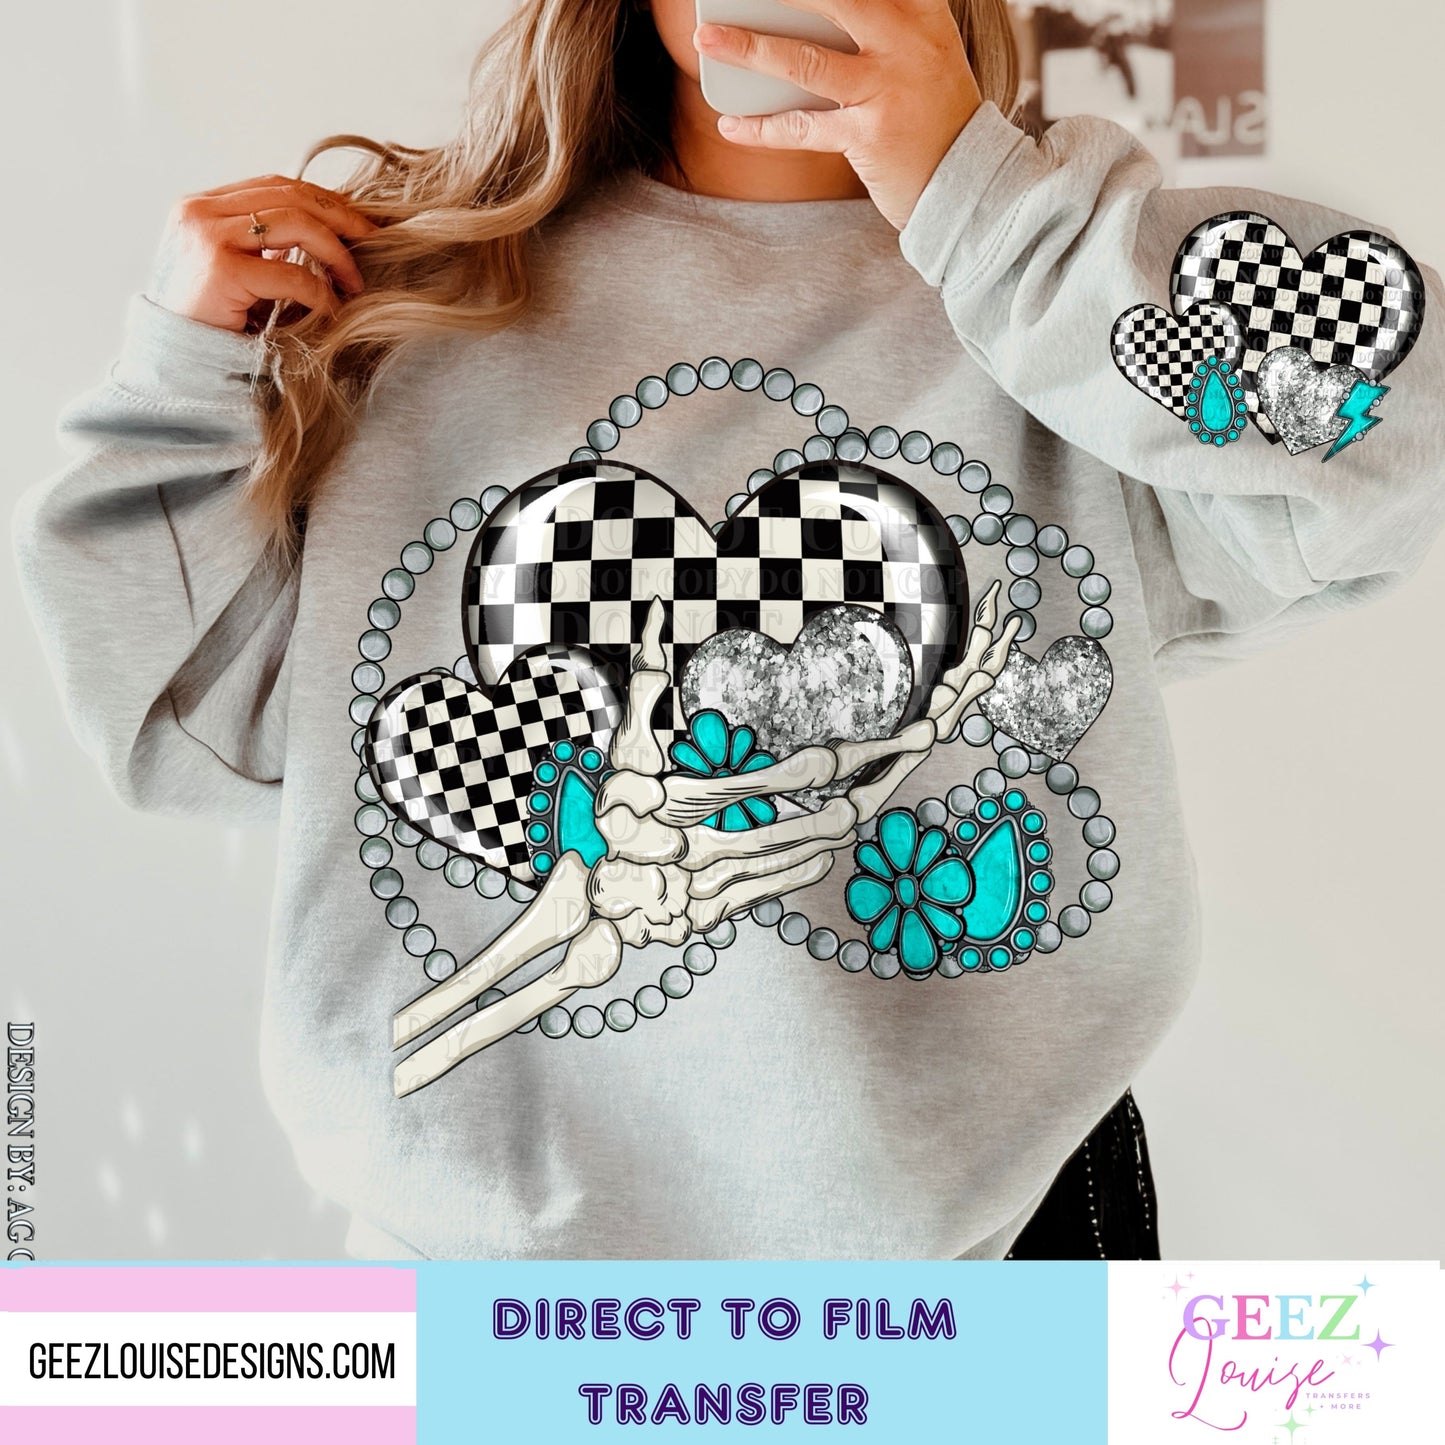 Checker and turquoise - Direct to Film Transfer - made to order